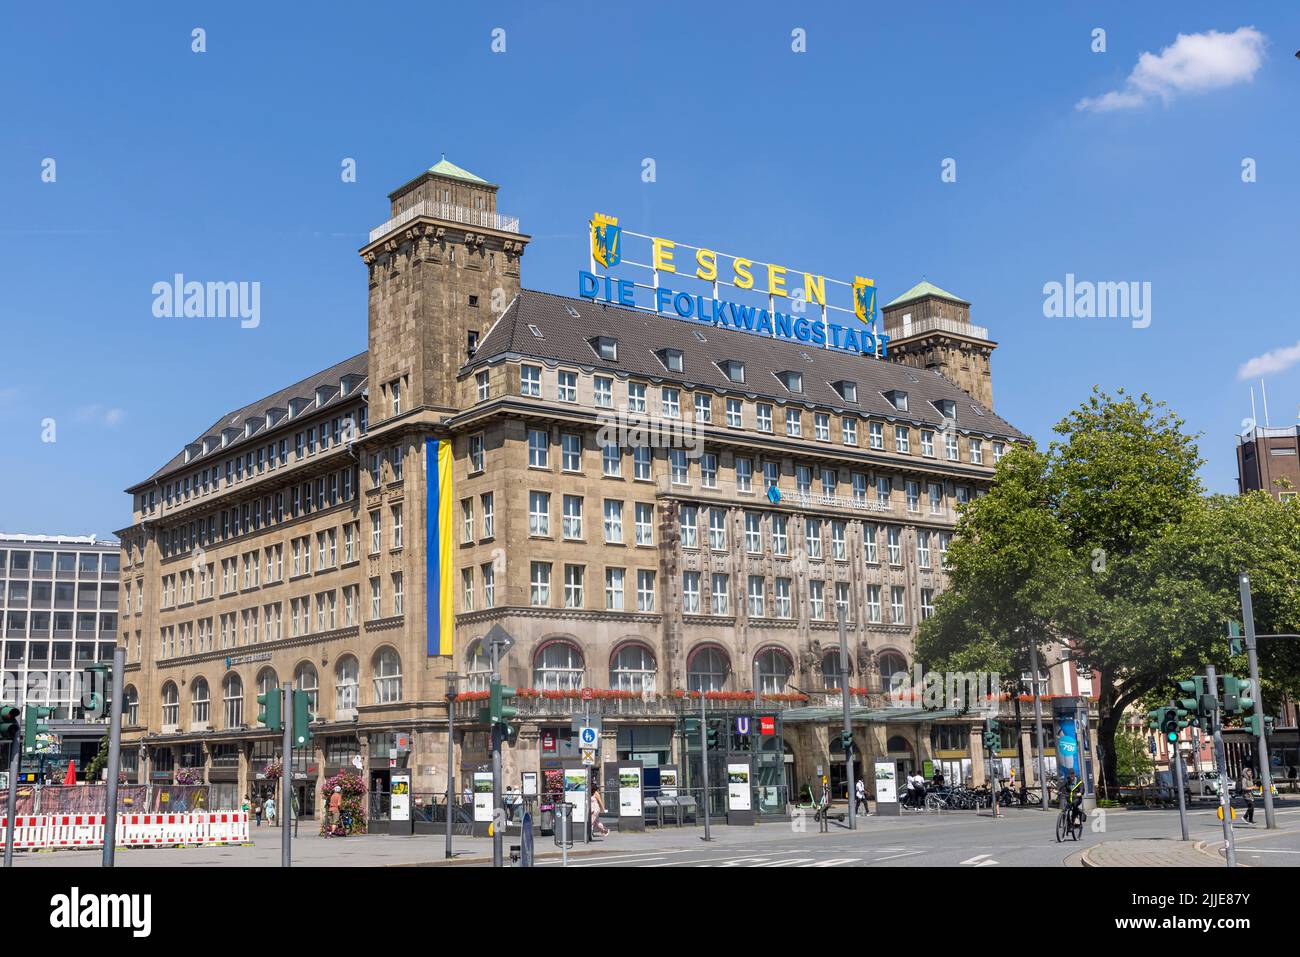 People walking in front of a prominent hotel building in Essen, Germany Stock Photo